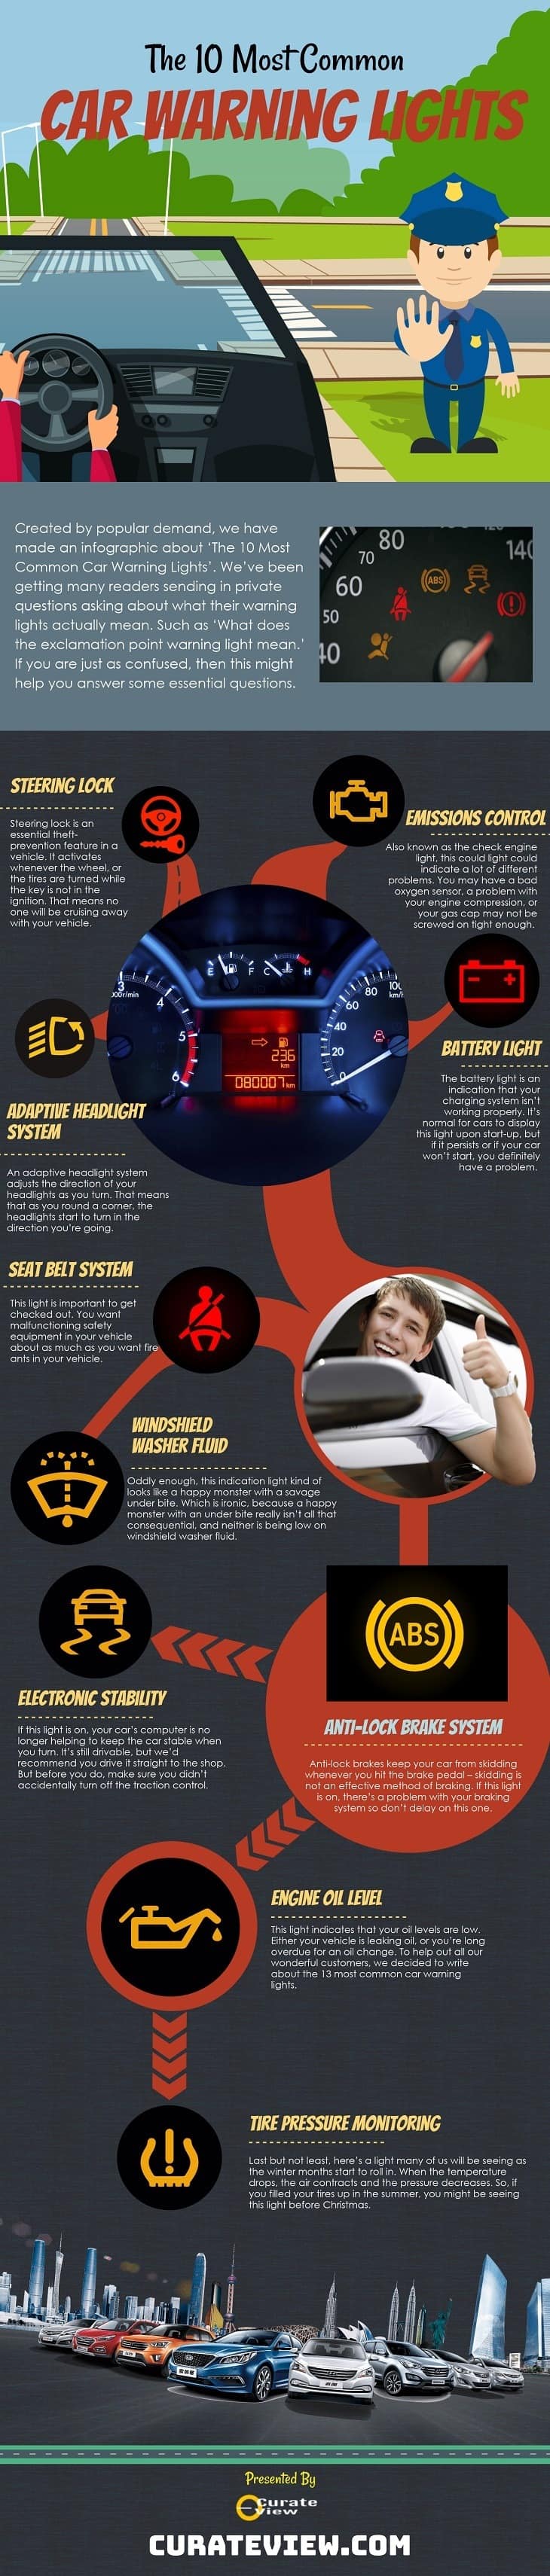 The 10 Most Common Car Warning Lights on Dashboard